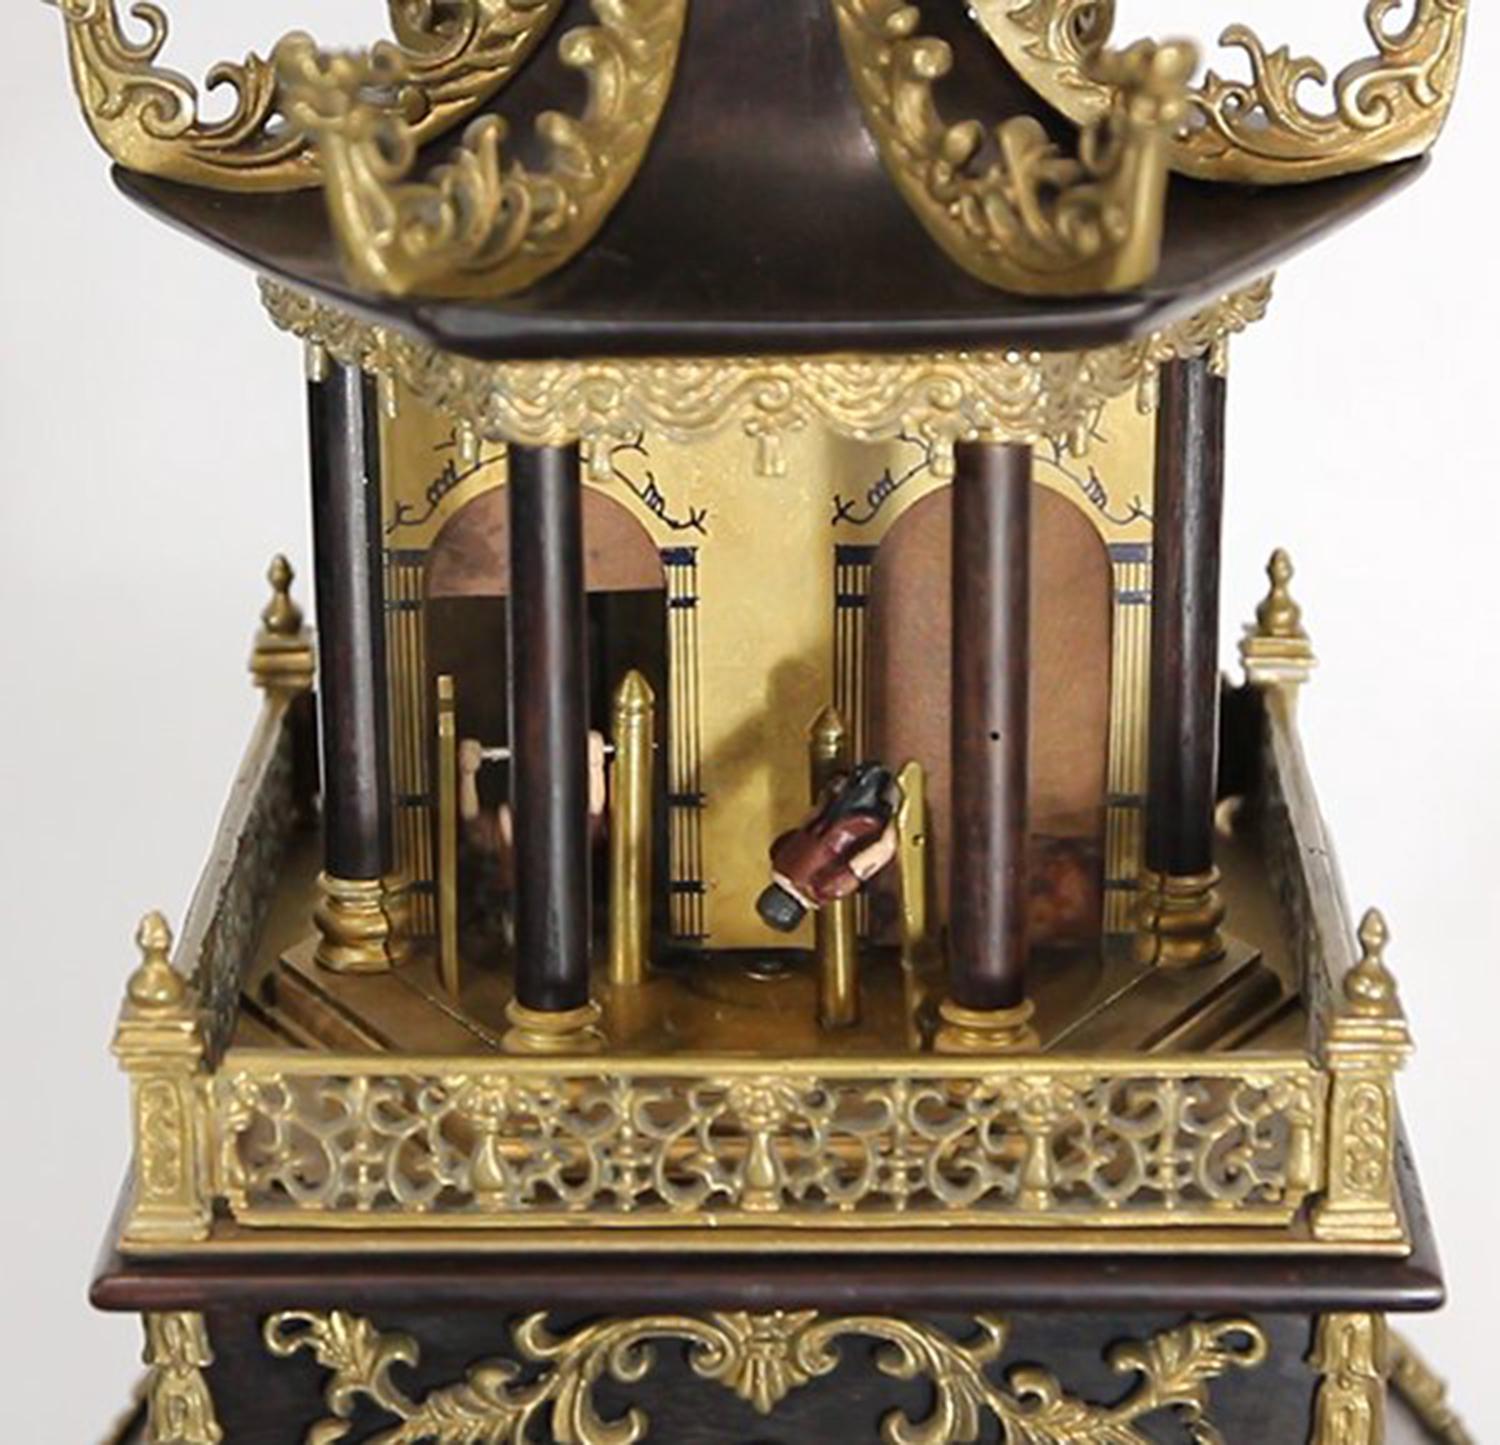 Vintage Chinese Canton Automaton Acrobat Musical Pagoda Waterfall Bracket Clock In Good Condition For Sale In Danville, CA